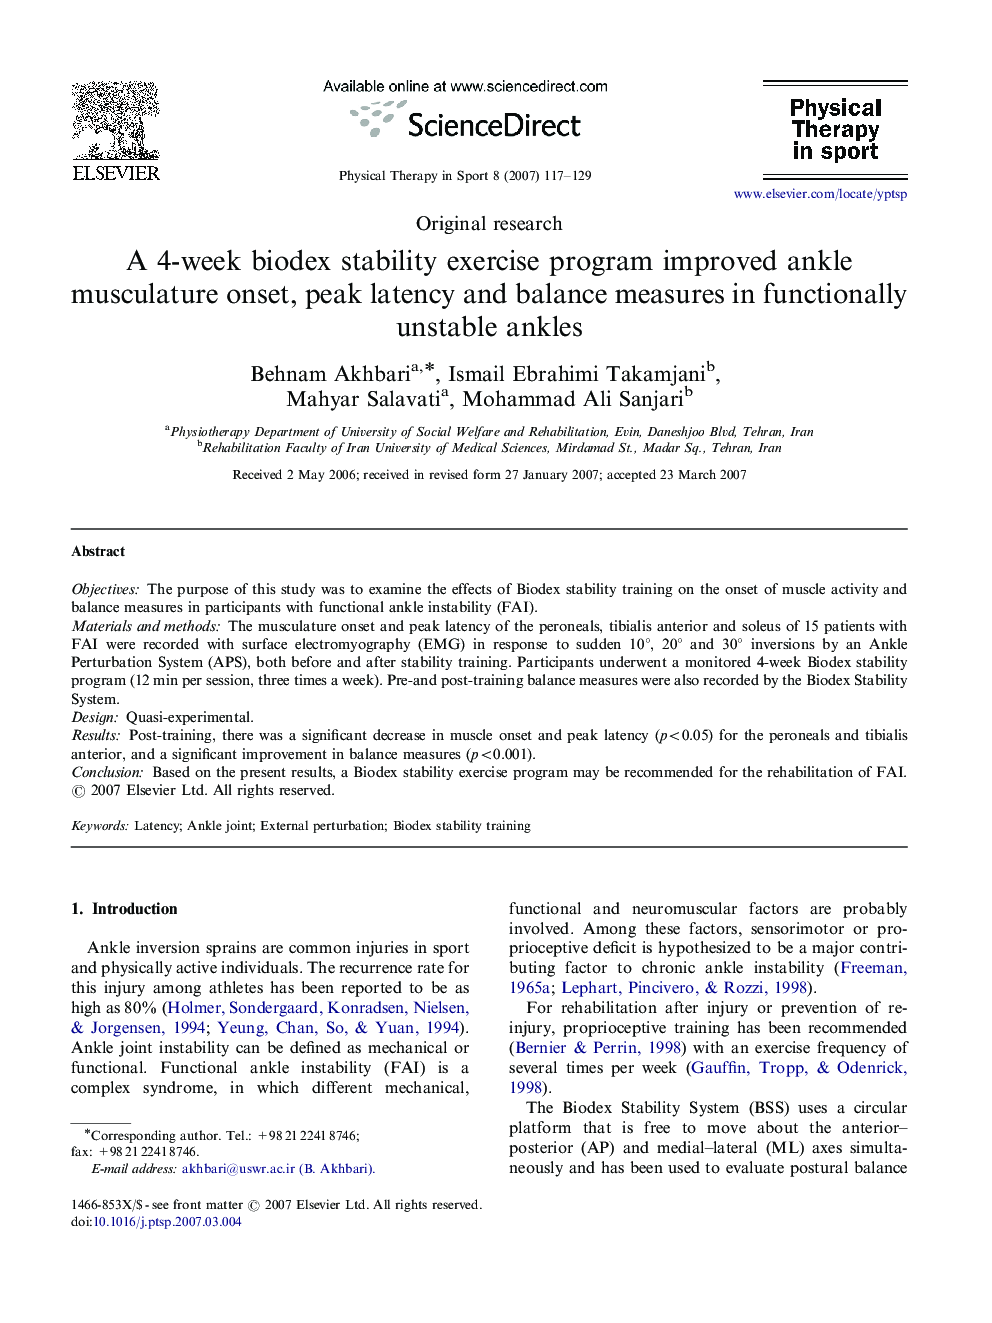 A 4-week biodex stability exercise program improved ankle musculature onset, peak latency and balance measures in functionally unstable ankles